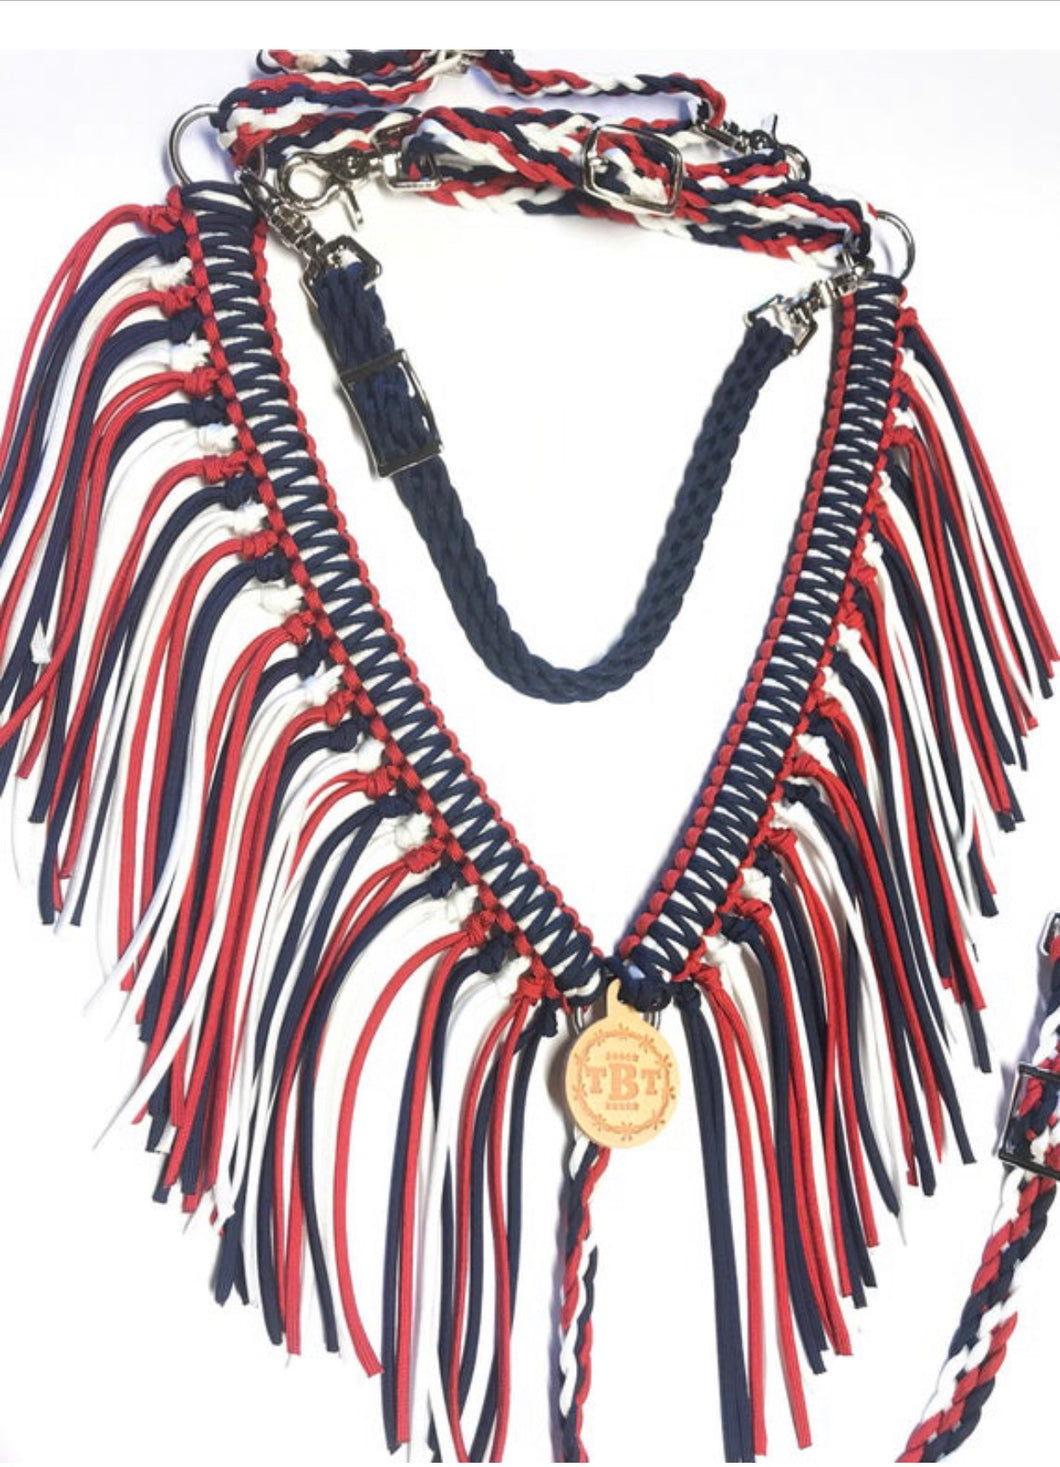 Red white and midnight blue fringe breast collar with wither strap